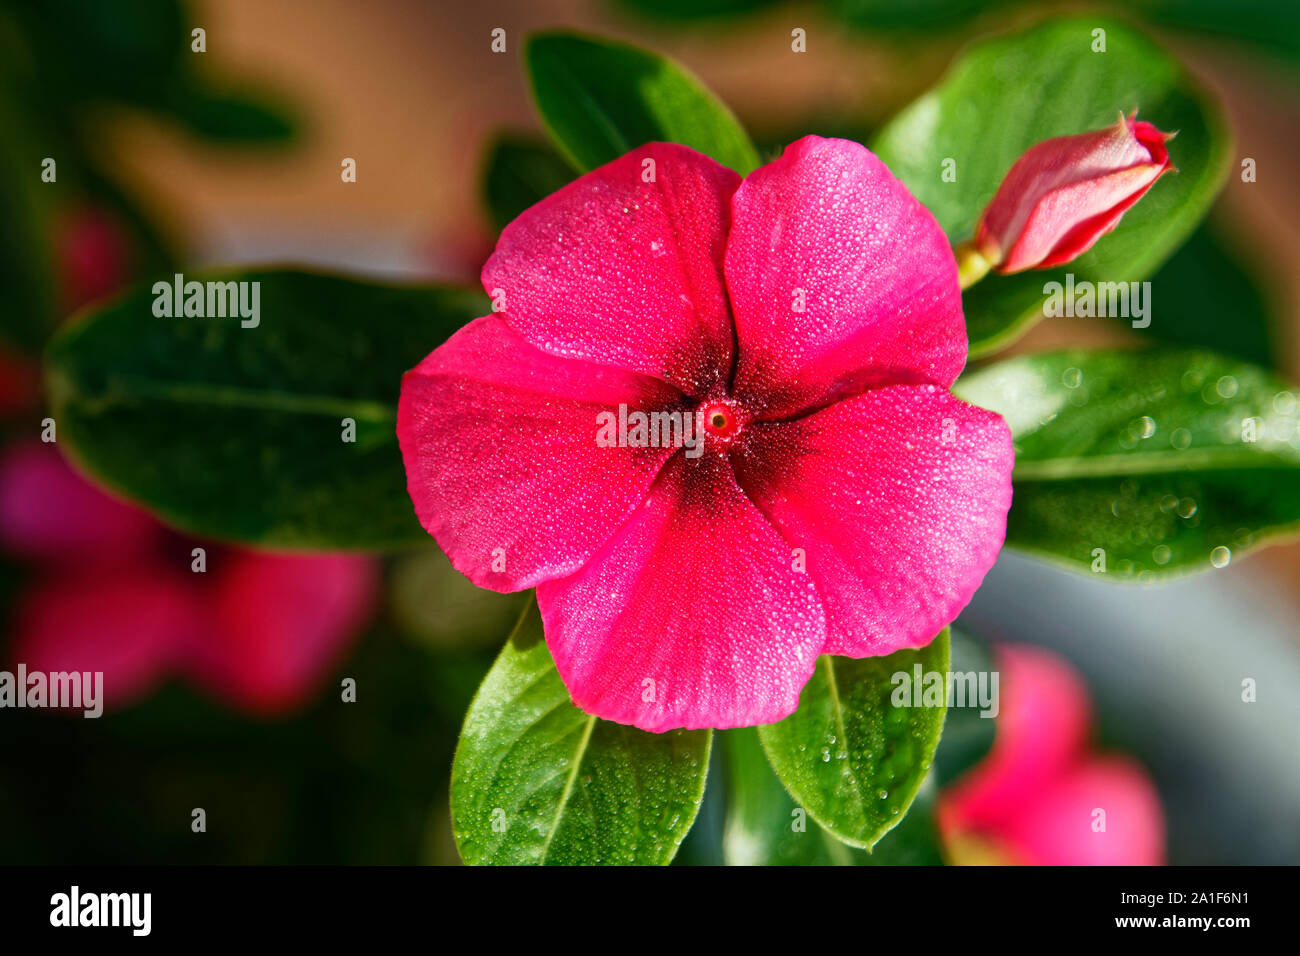 Vinca flower, bud, cerise, Periwinkle, close-up, dew, water droplets, green leaves, cultivated, 5 petals, garden, perennial, family Apocynaceae; summe Stock Photo